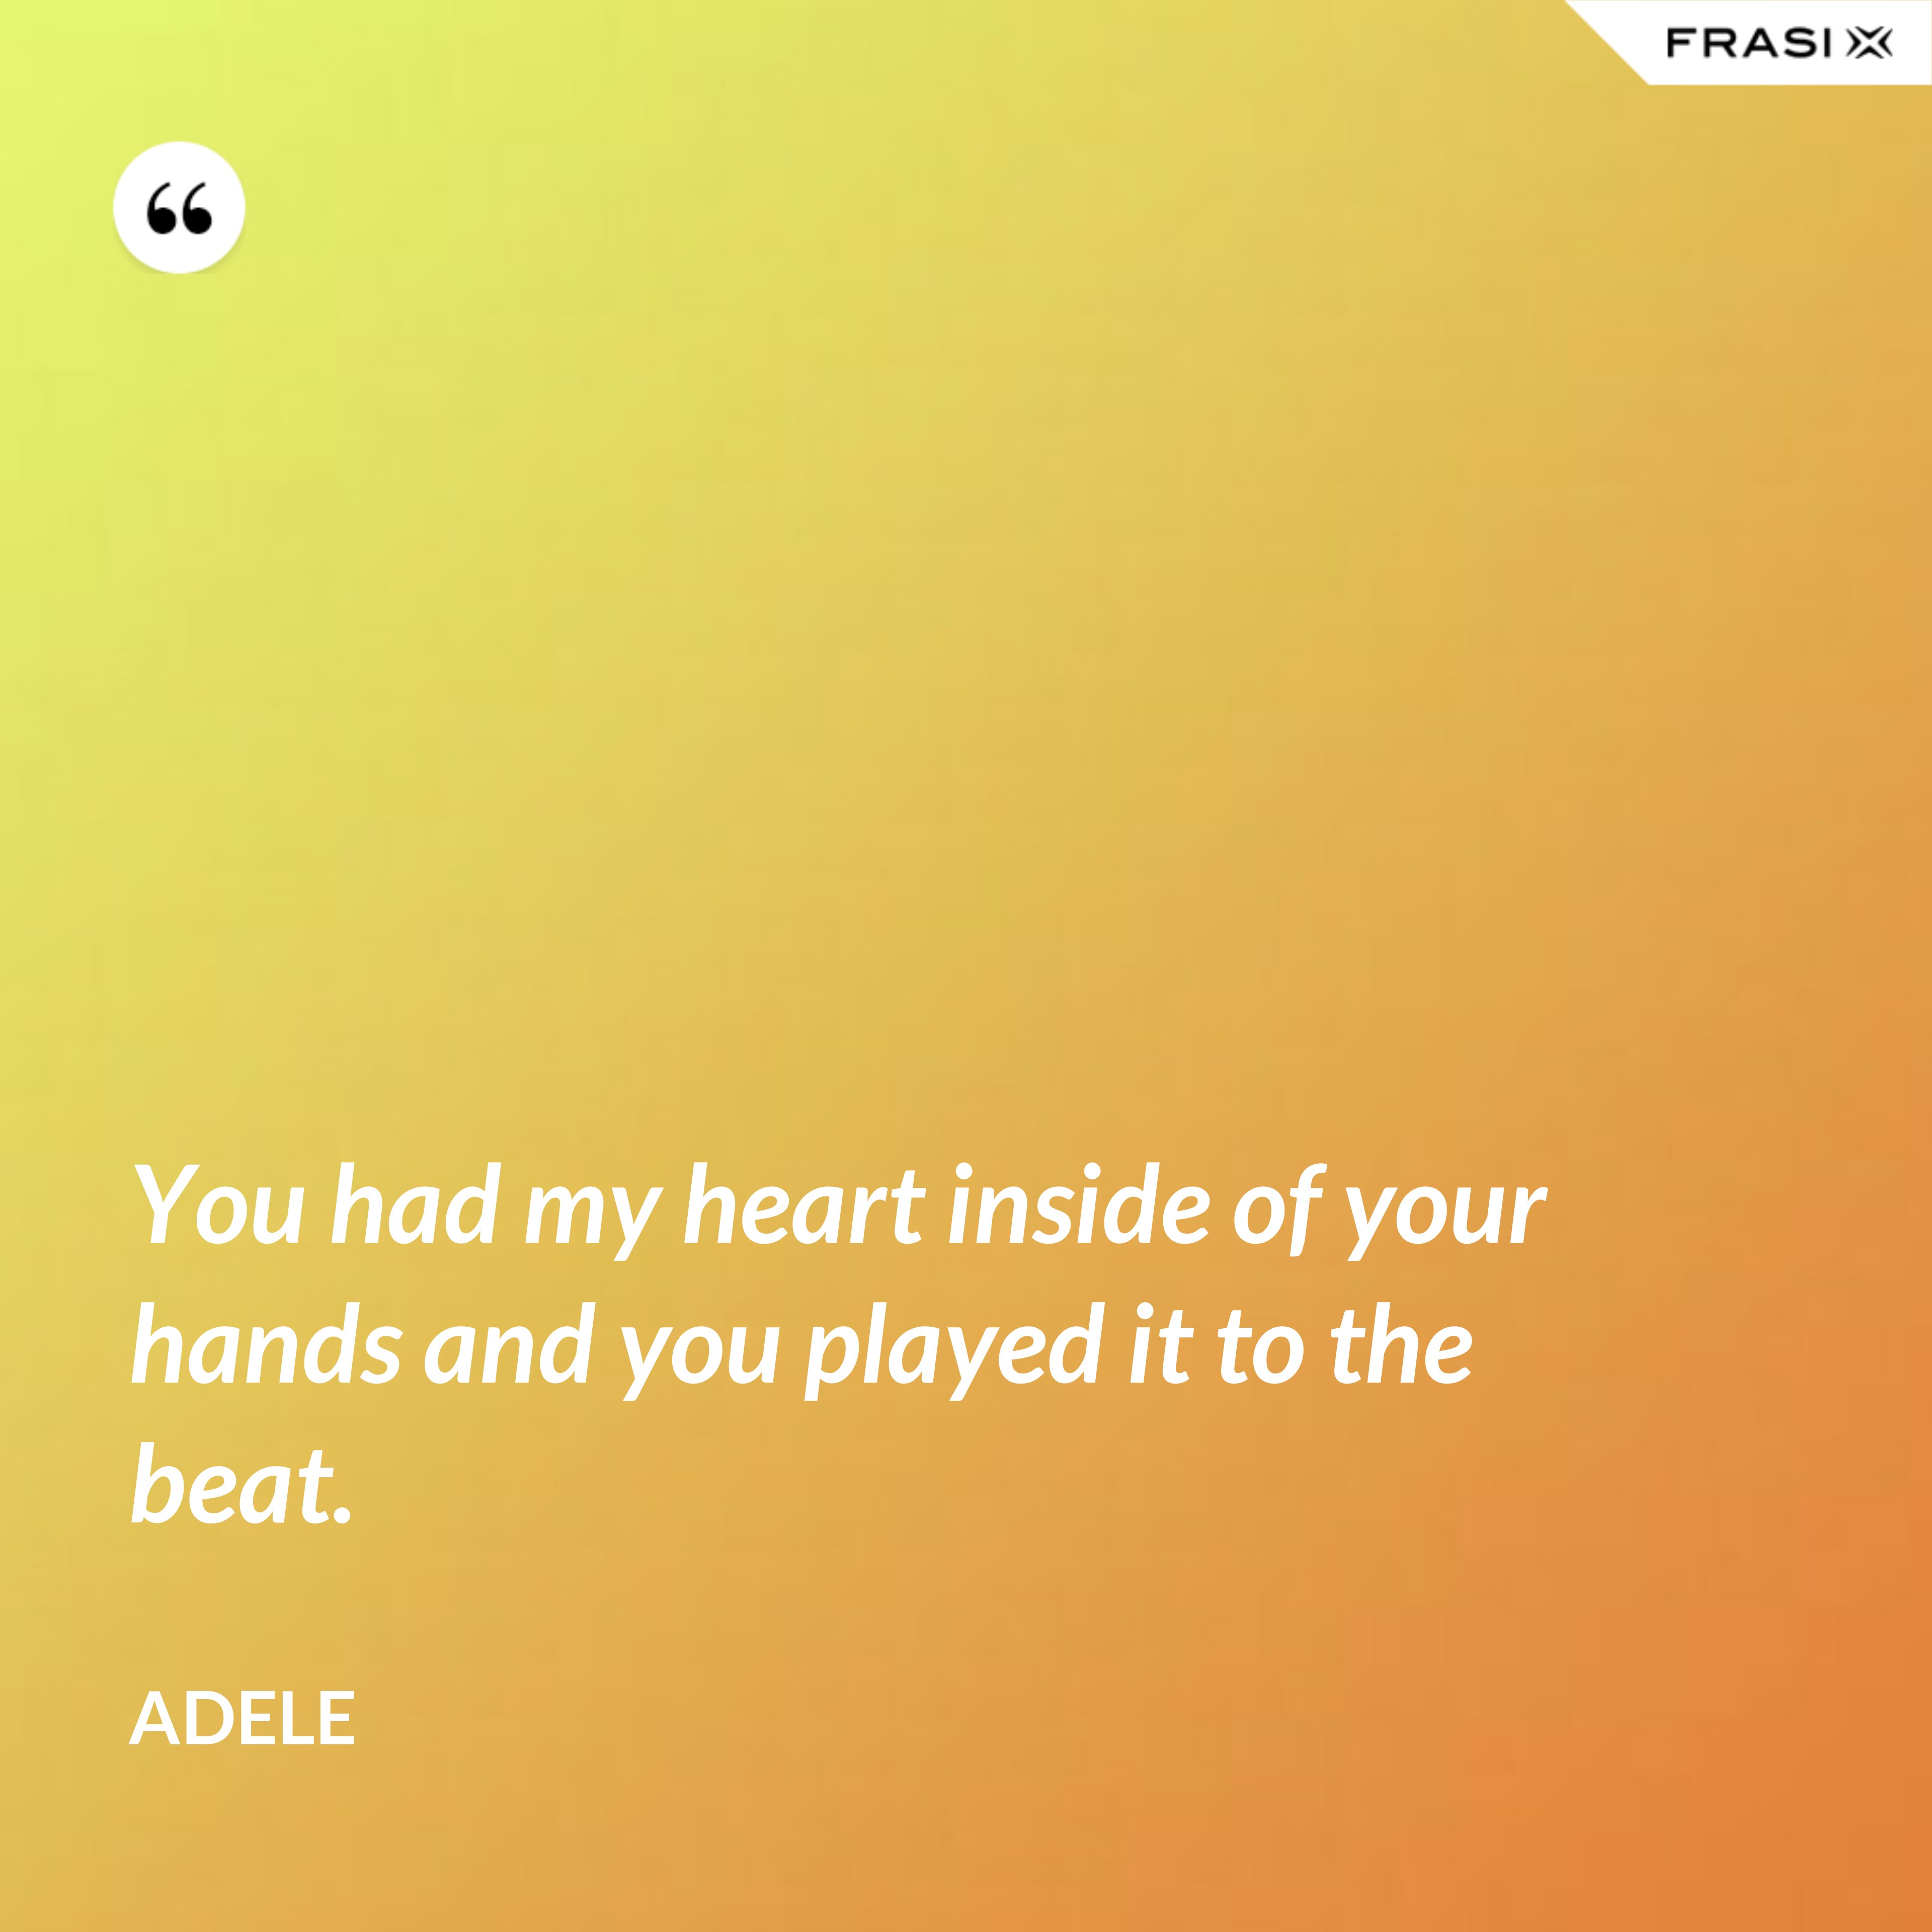 You had my heart inside of your hands and you played it to the beat. - Adele